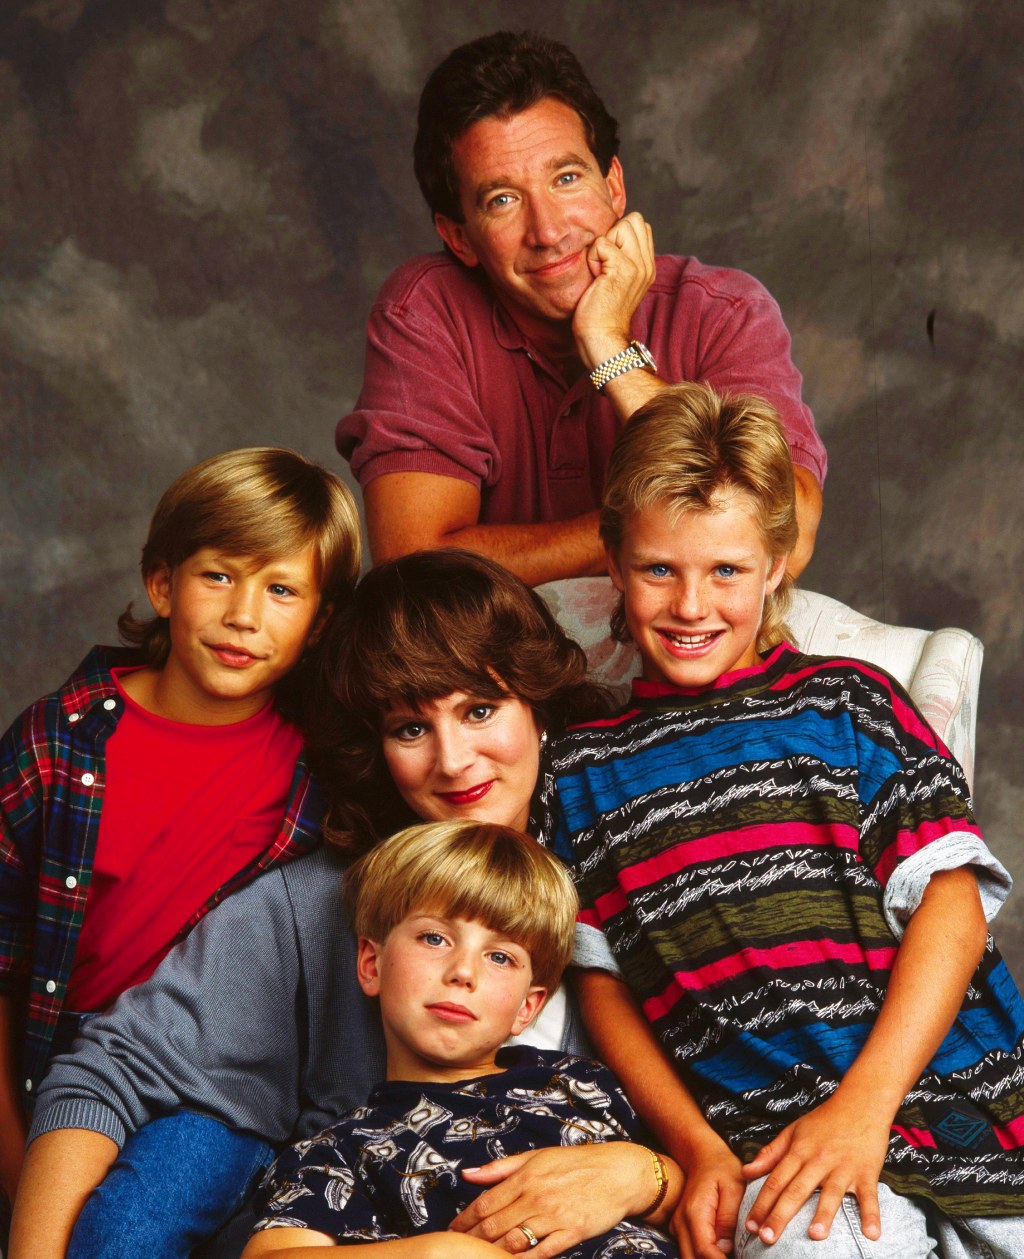 home improvement cast where are they now gallery wonderwall com